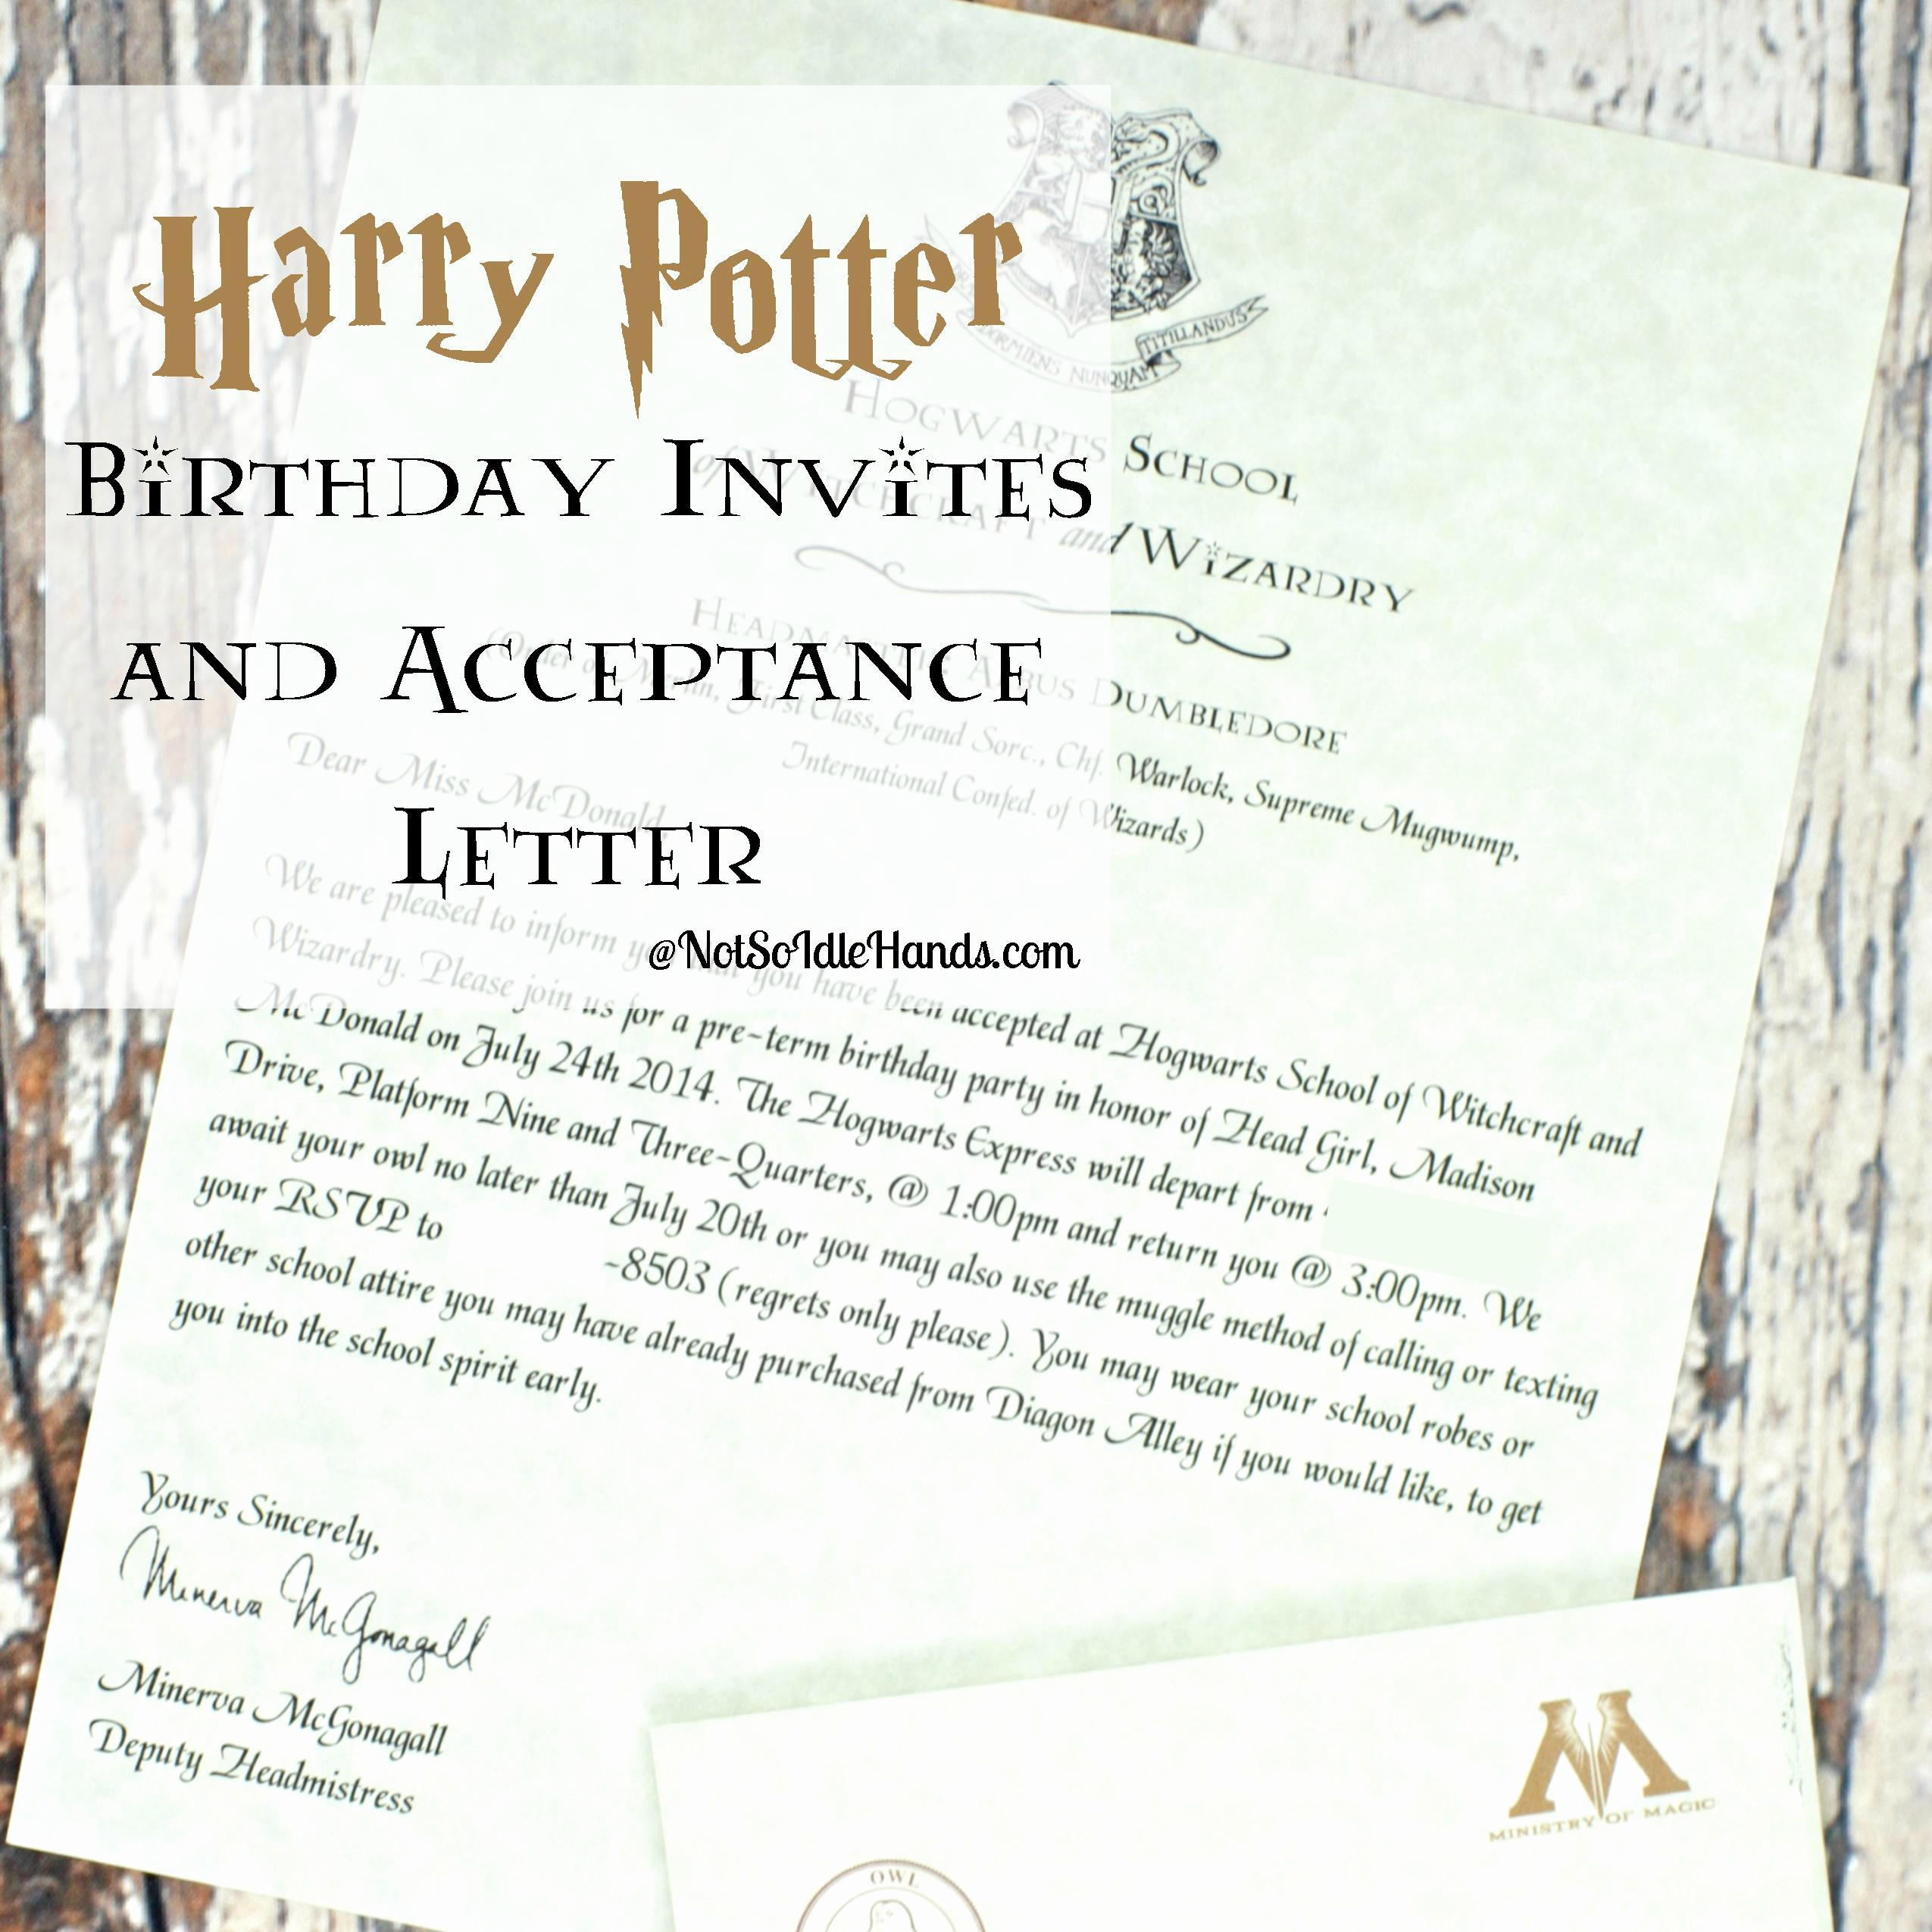 Harry Potter Invitation Letter Inspirational Harry Potter Birthday Invitations and Authentic Acceptance